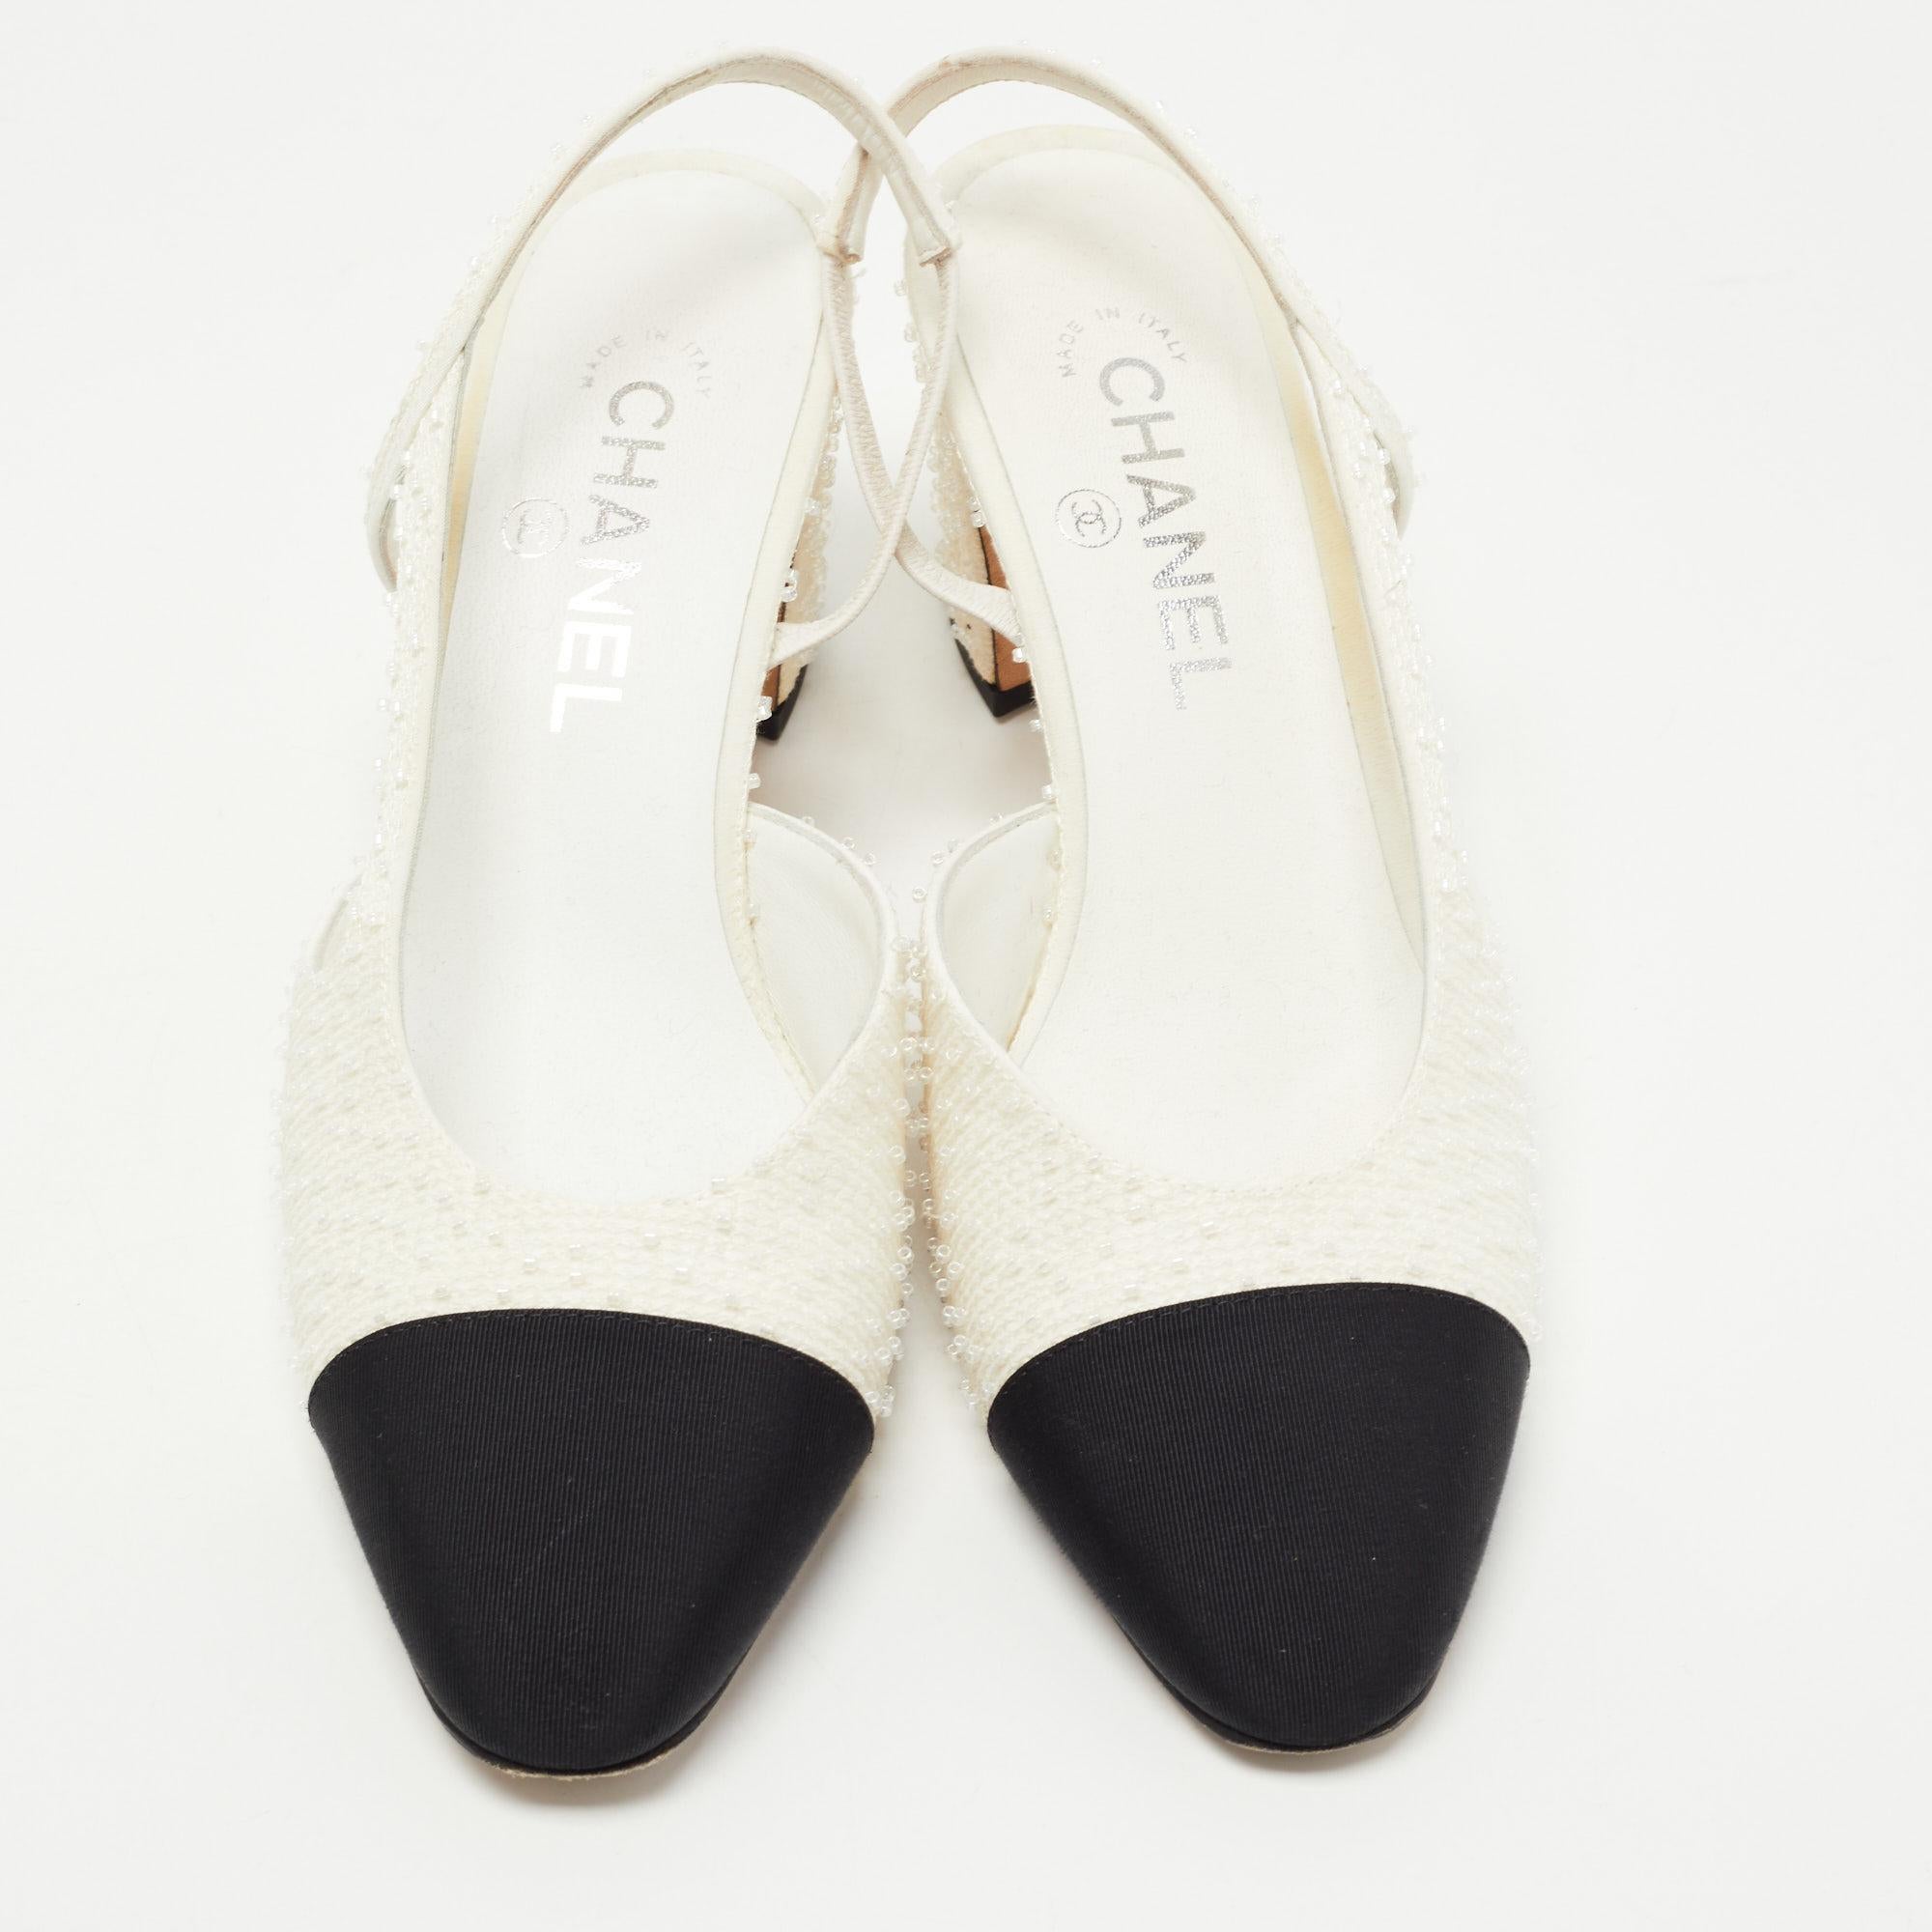 Pump shoes for women are a versatile and stylish choice for any wardrobe. Featuring a classic design with perfect arches, these Chanel slingback pumps can be dressed up or down for any occasion. Their comfortable fit and easy slip-on design makes